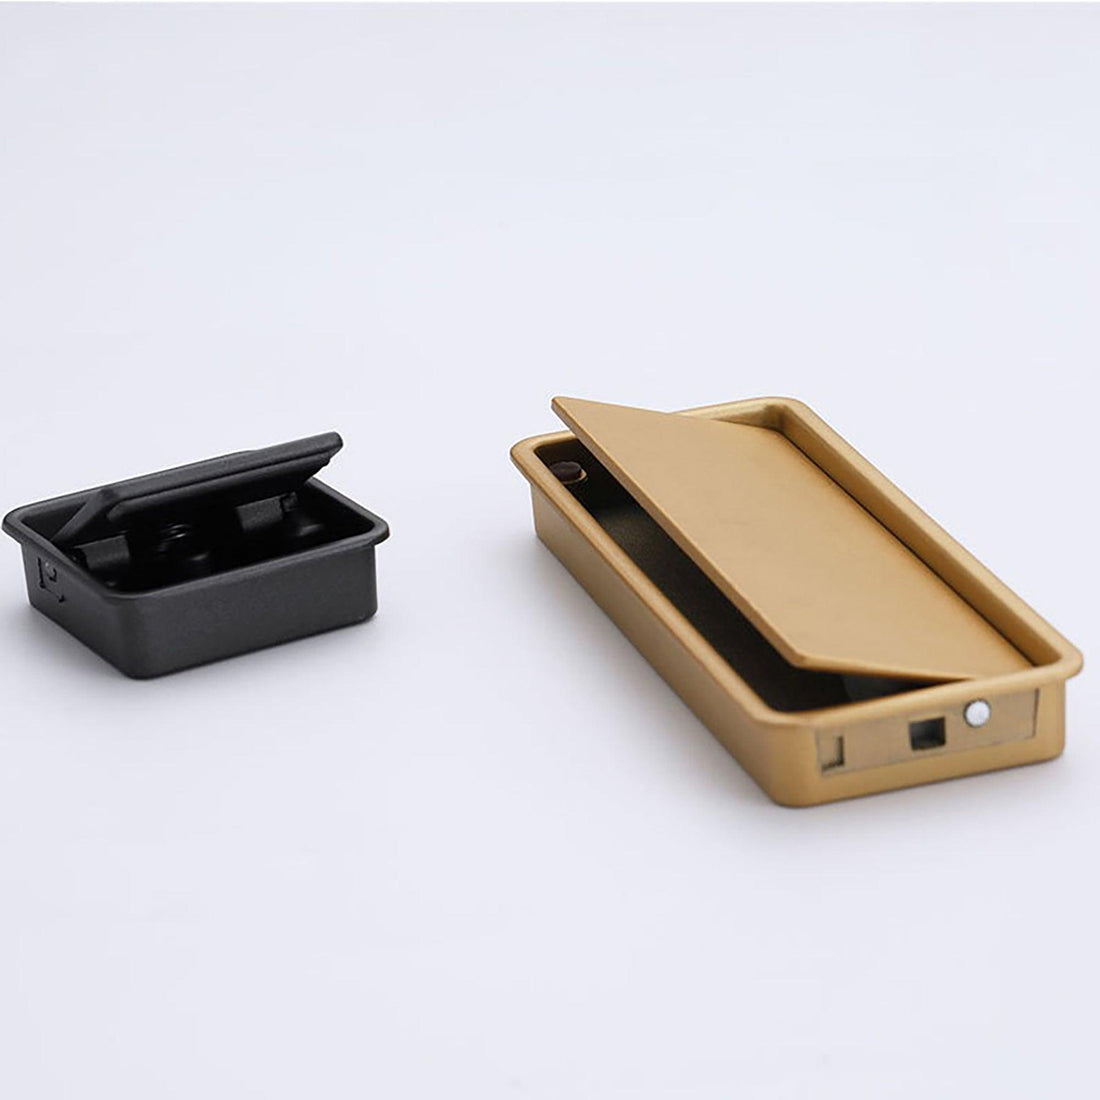 Concealed Square Handle - M A N T A R A